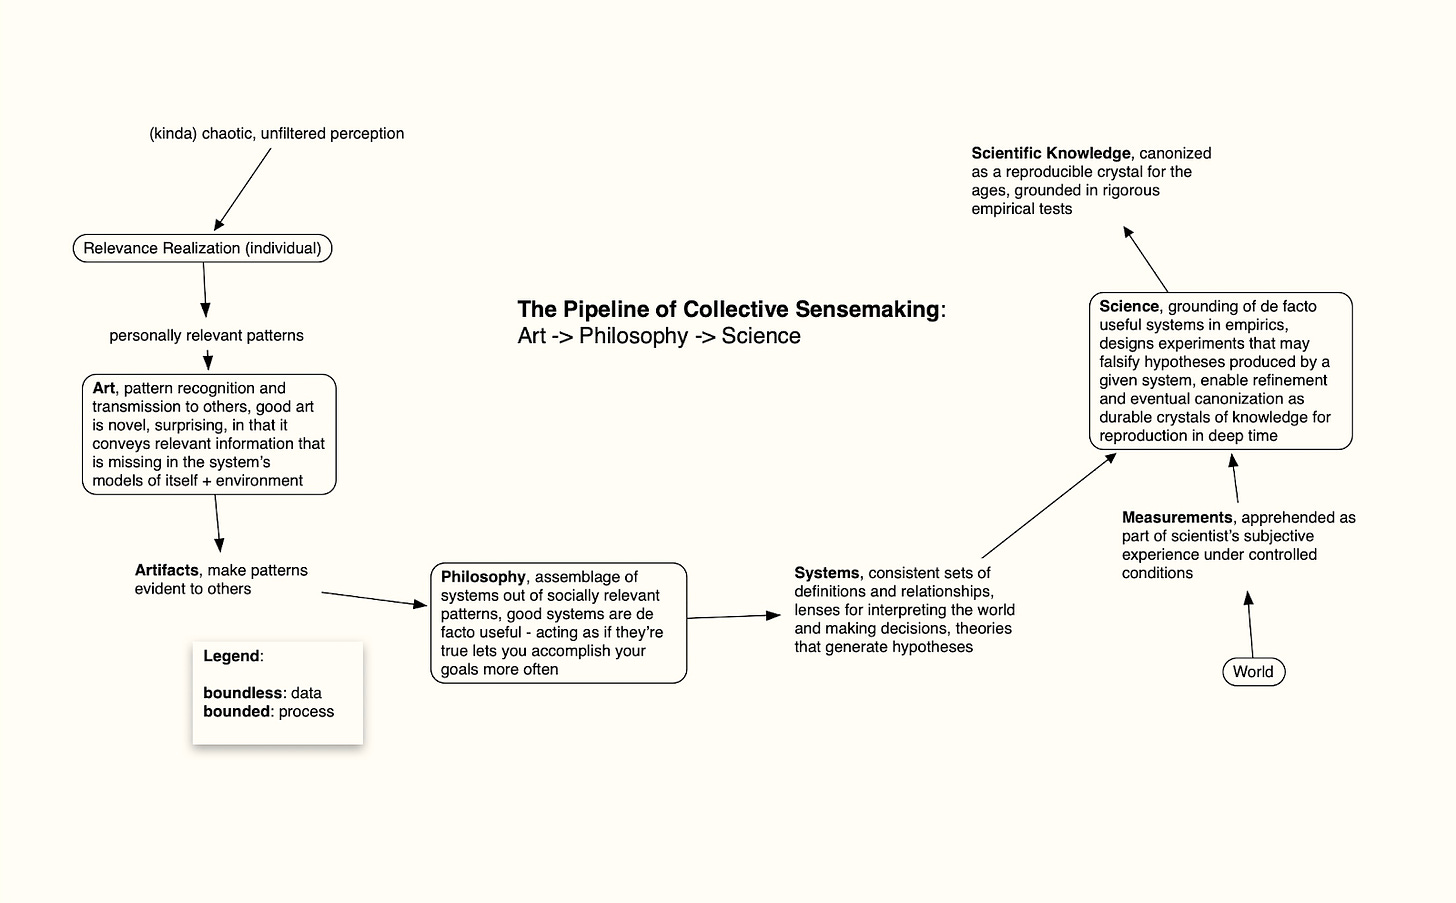 The Pipeline of Collective Sensemaking